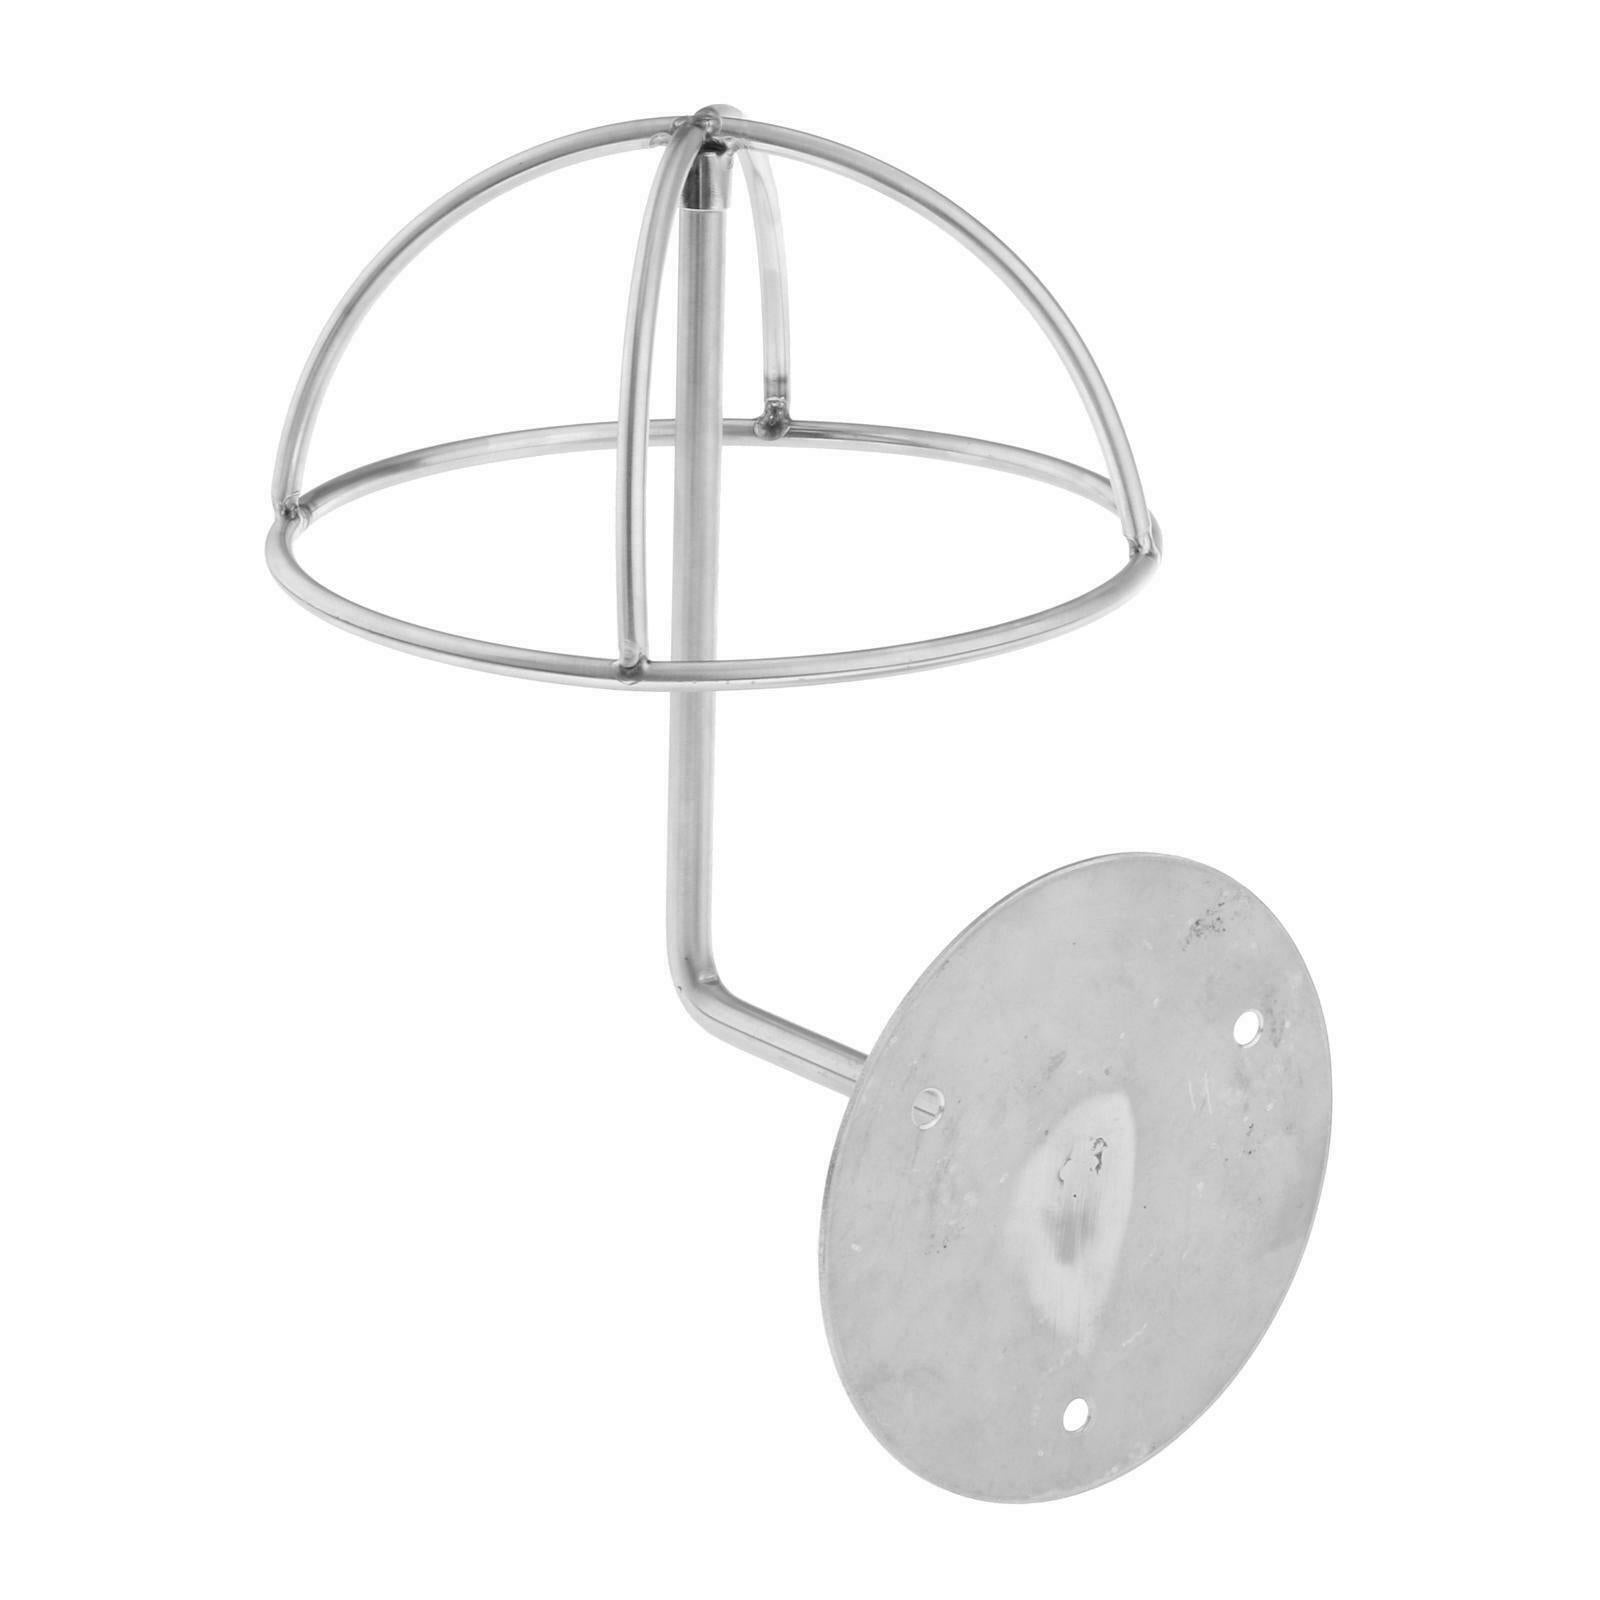 Decorative Wall Mounted Wire Stainless Steel   Wig Display Rack Dome Shape